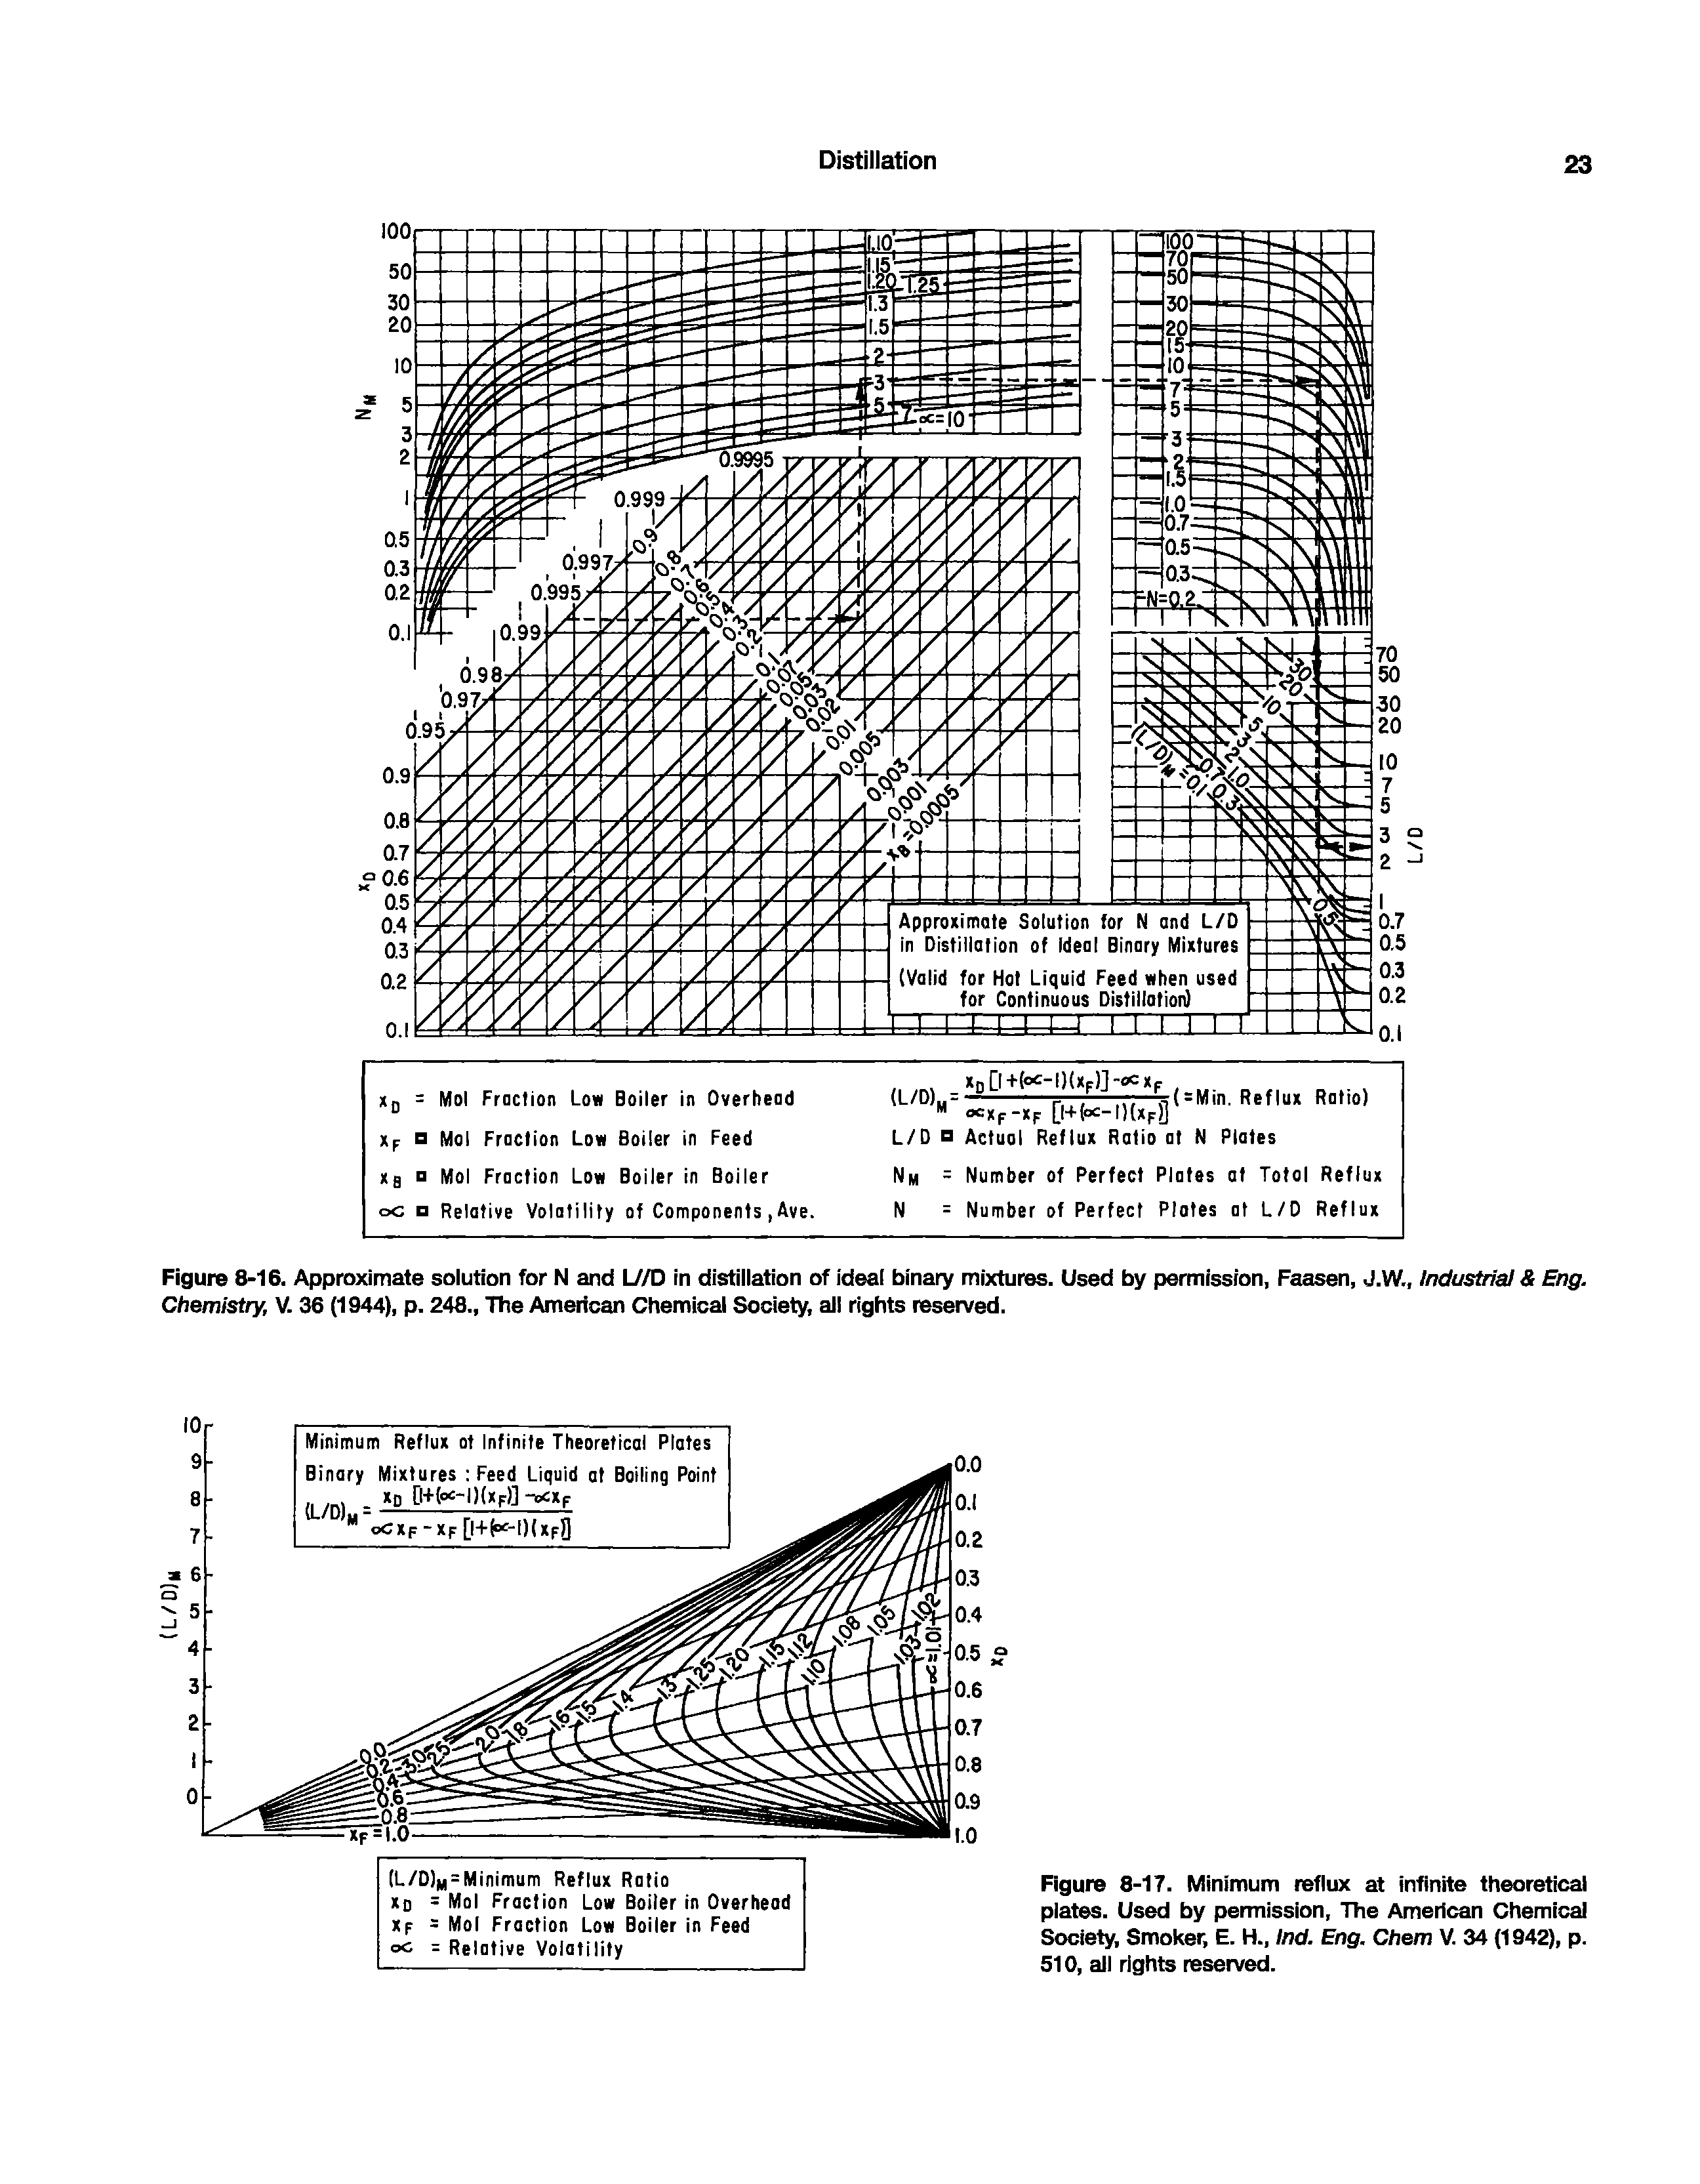 Figure 8-16. Approximate solution for N and ly/D in distillation of ideal binary mixtures. Used by permission, Faasen, J.W., Industrial Eng. Chemistry, V. 36 (1944), p. 248., The American Chemical Society, all rights reserved.